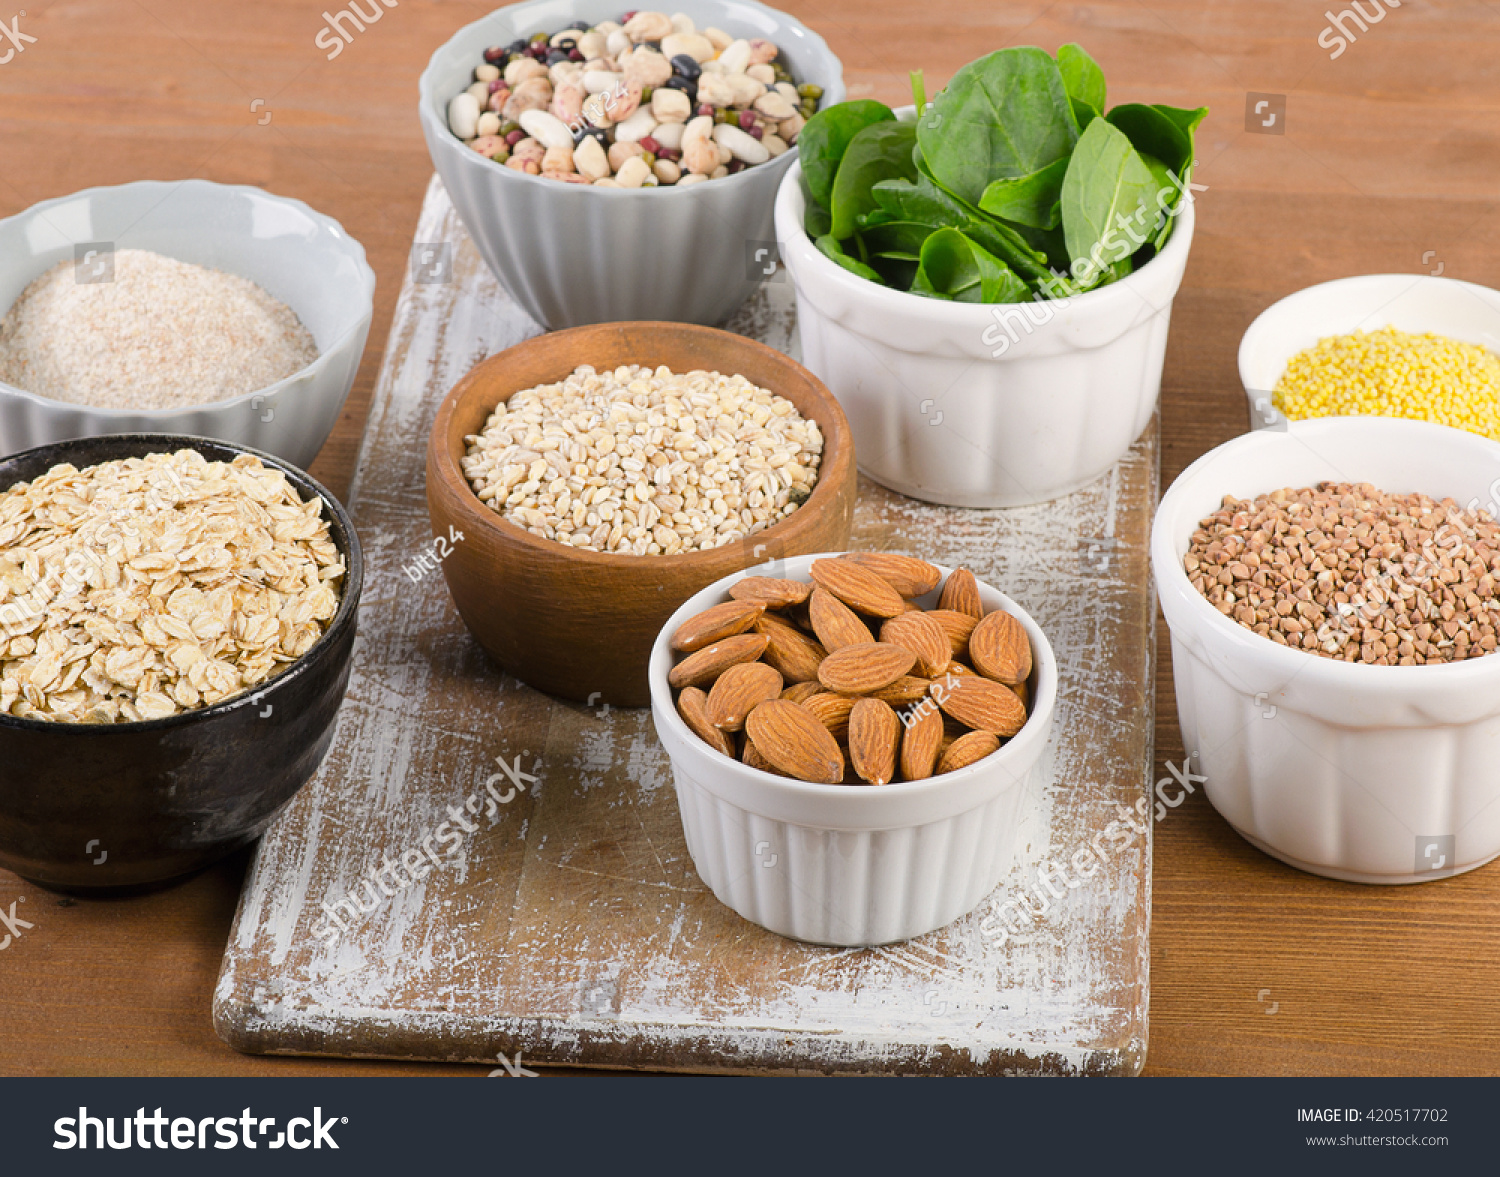 Food Sources of Silicon on  wooden background. Healthy eating #420517702